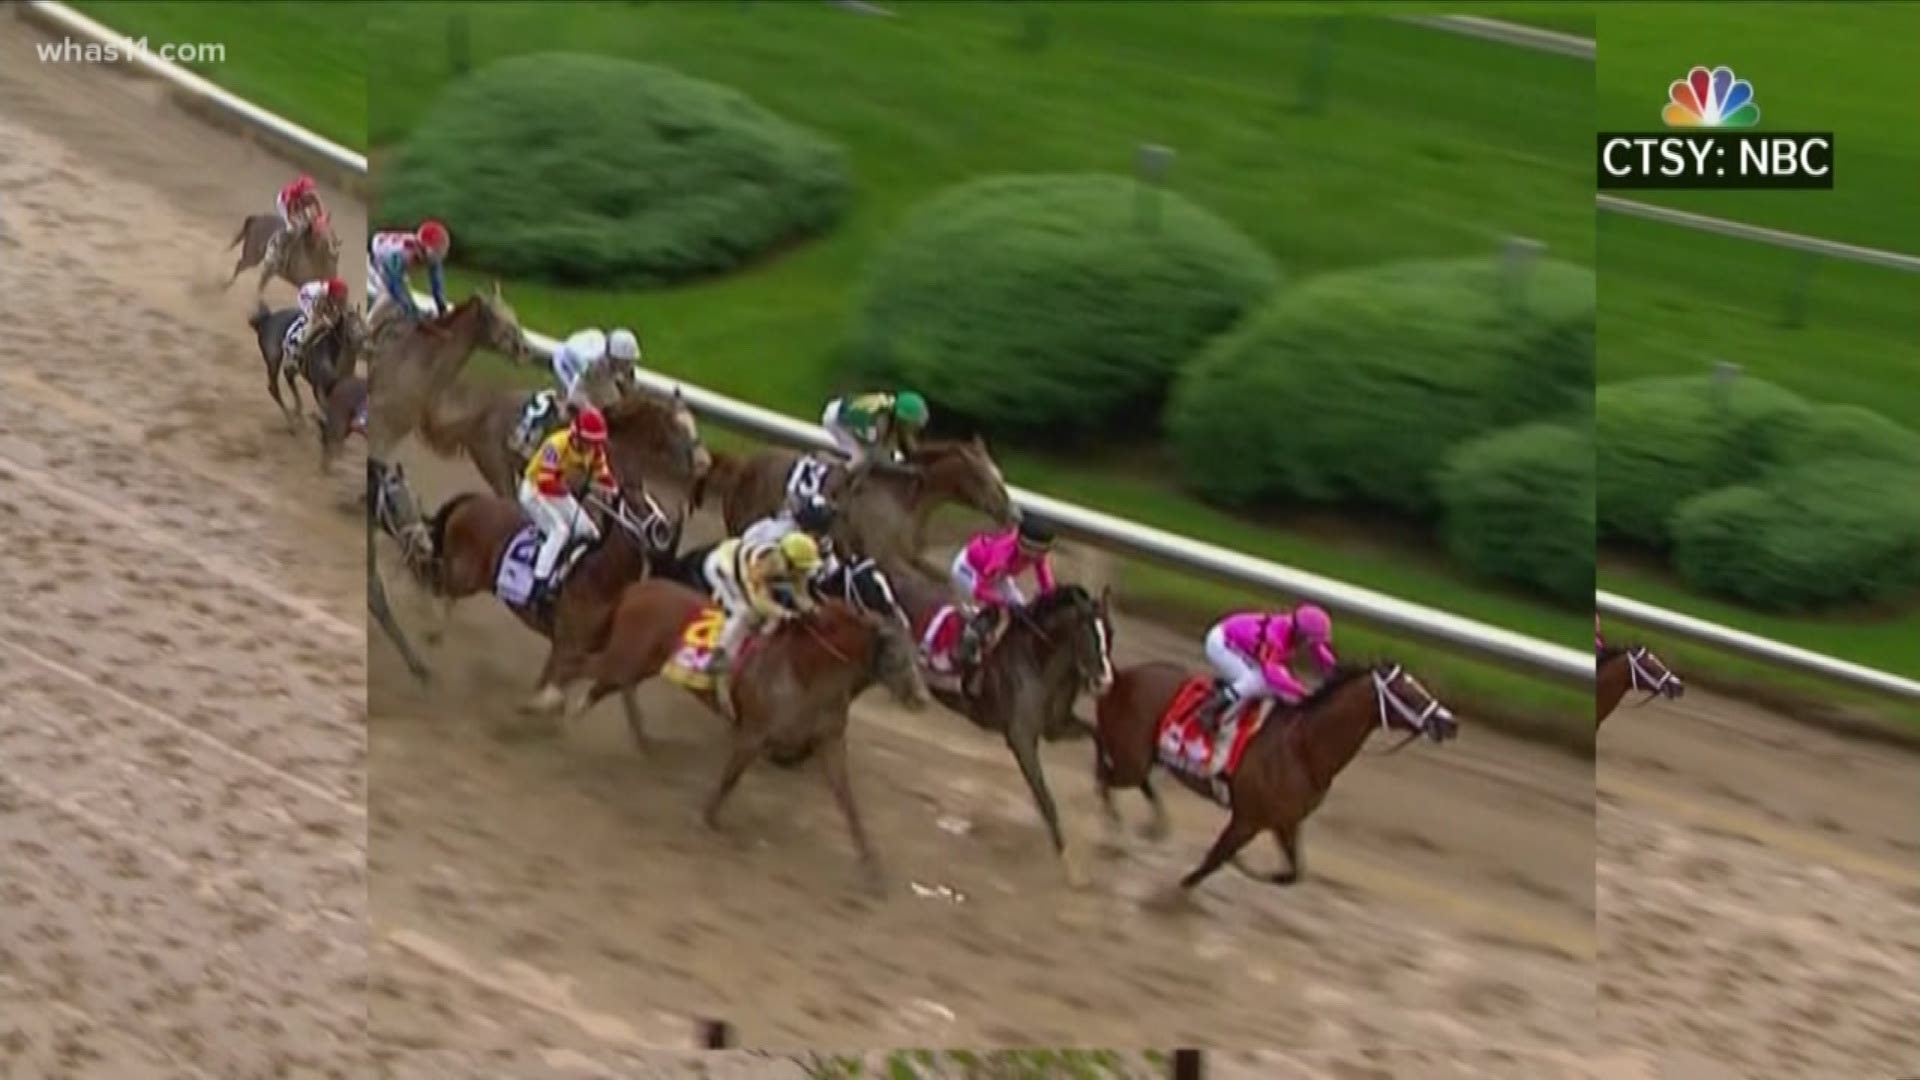 For the first time in Kentucky Derby history, the horse that won the race was disqualified for interference.